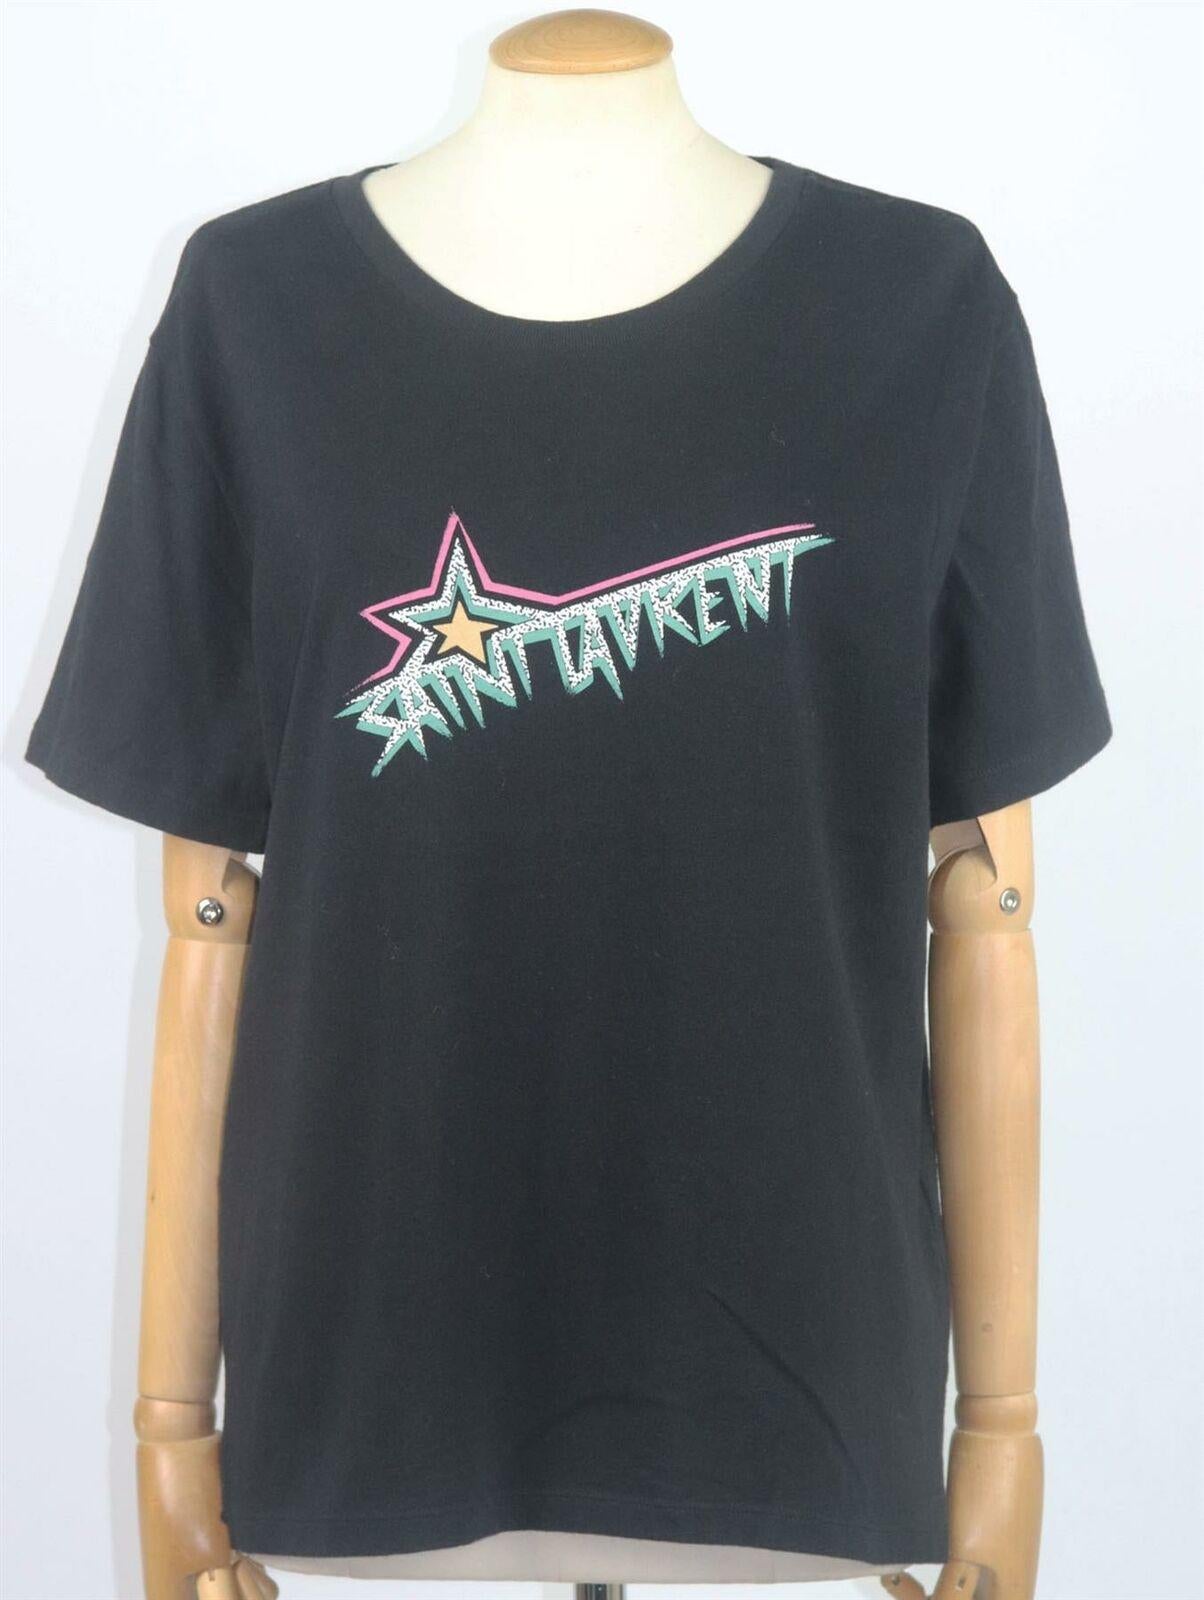 Saint Laurent's T-shirt is printed with the house's iconic logo - 'Saint Laurent' in a graphic star typeface are inspired by the original 80's branding, it's made from black cotton-jersey and is cut for a relaxed fit with slightly elongated sleeves